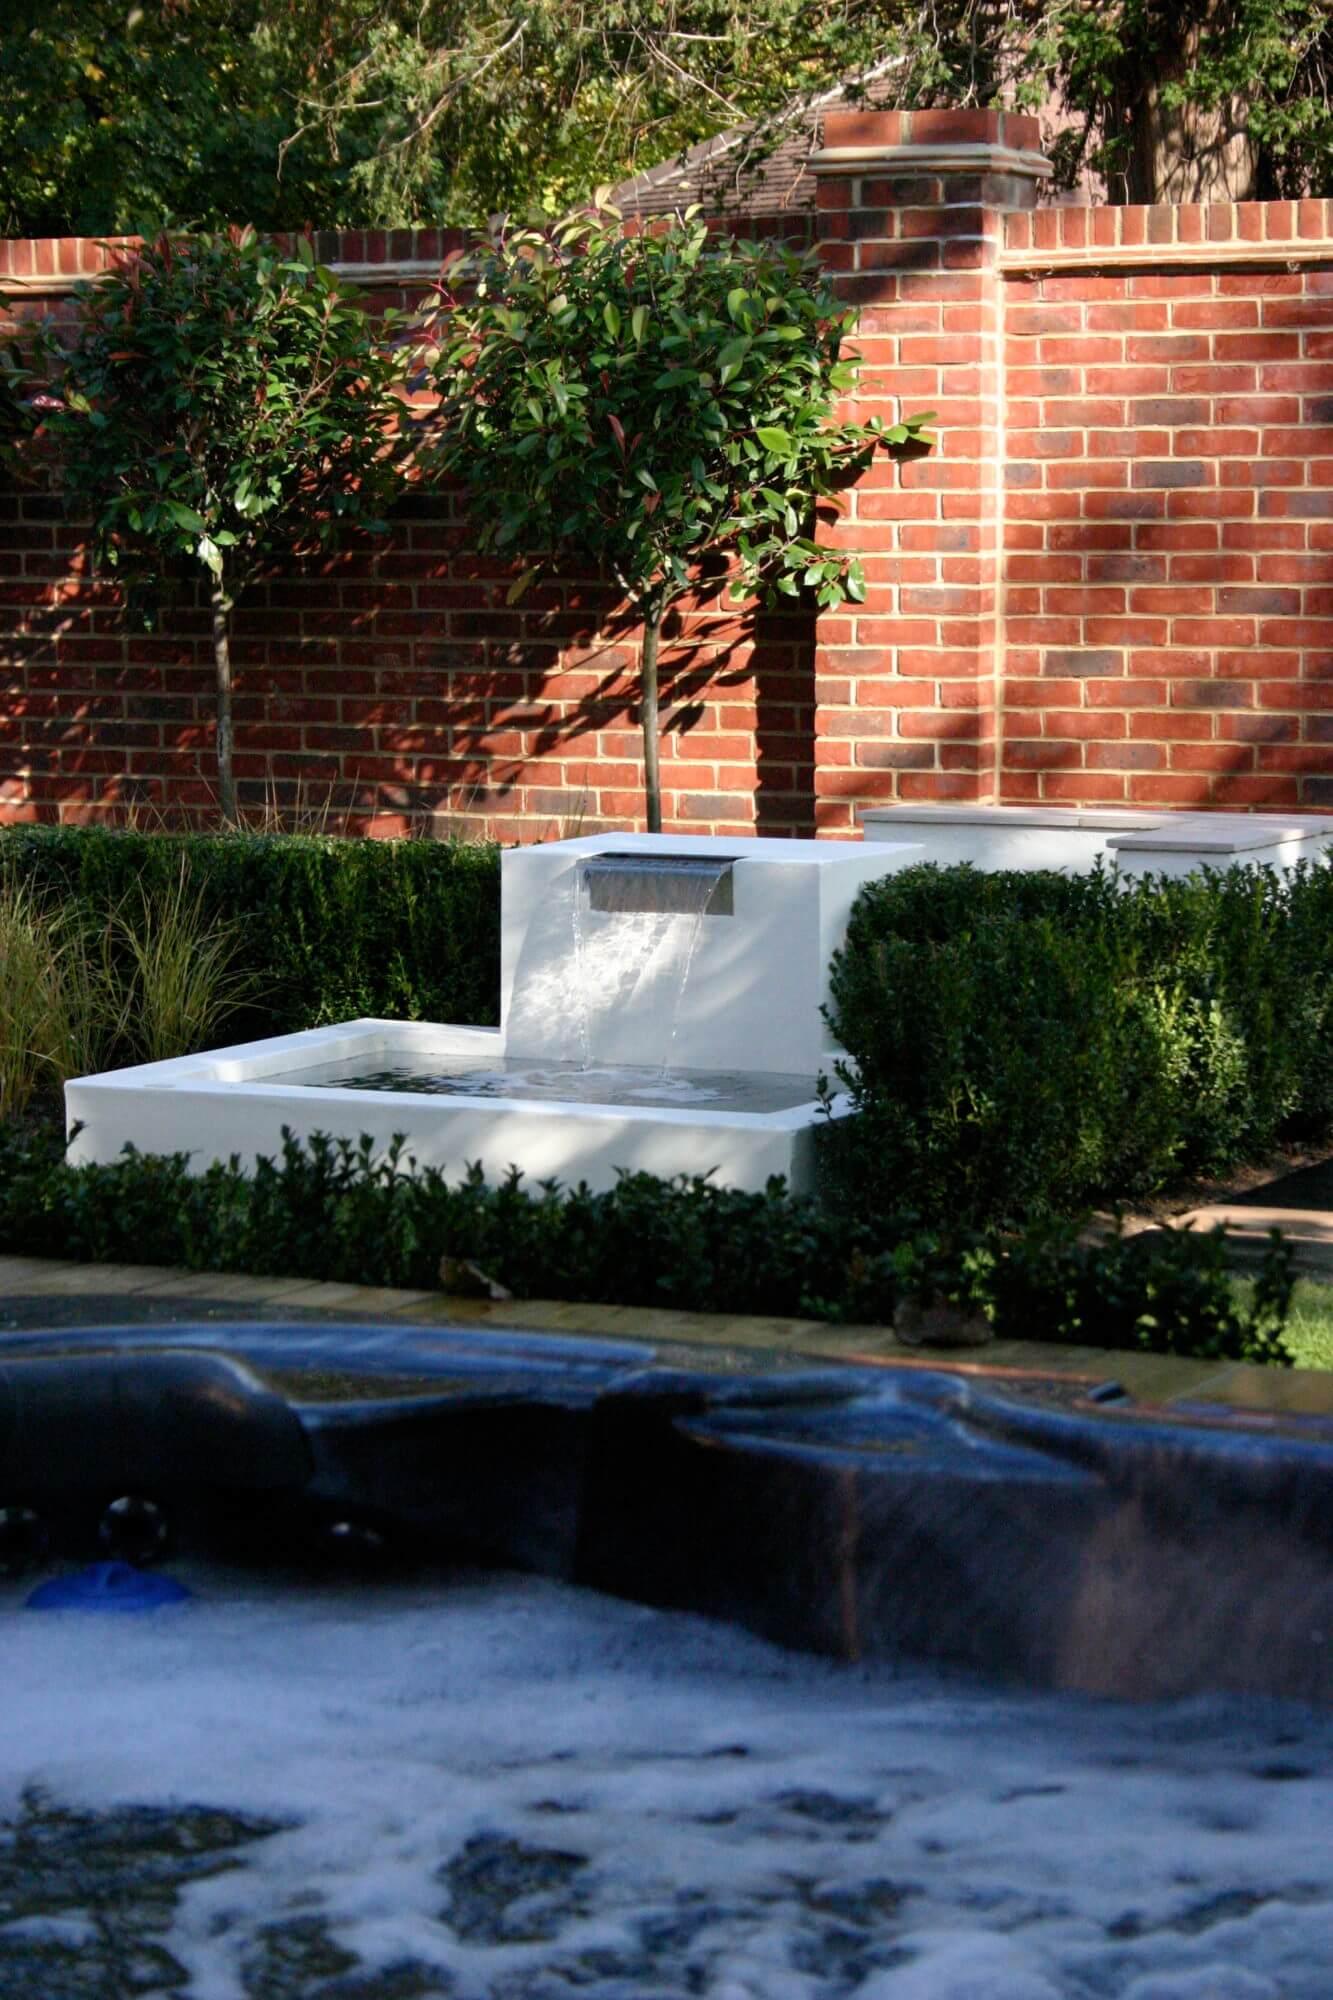 Marble garden water feature in front of red brick wall